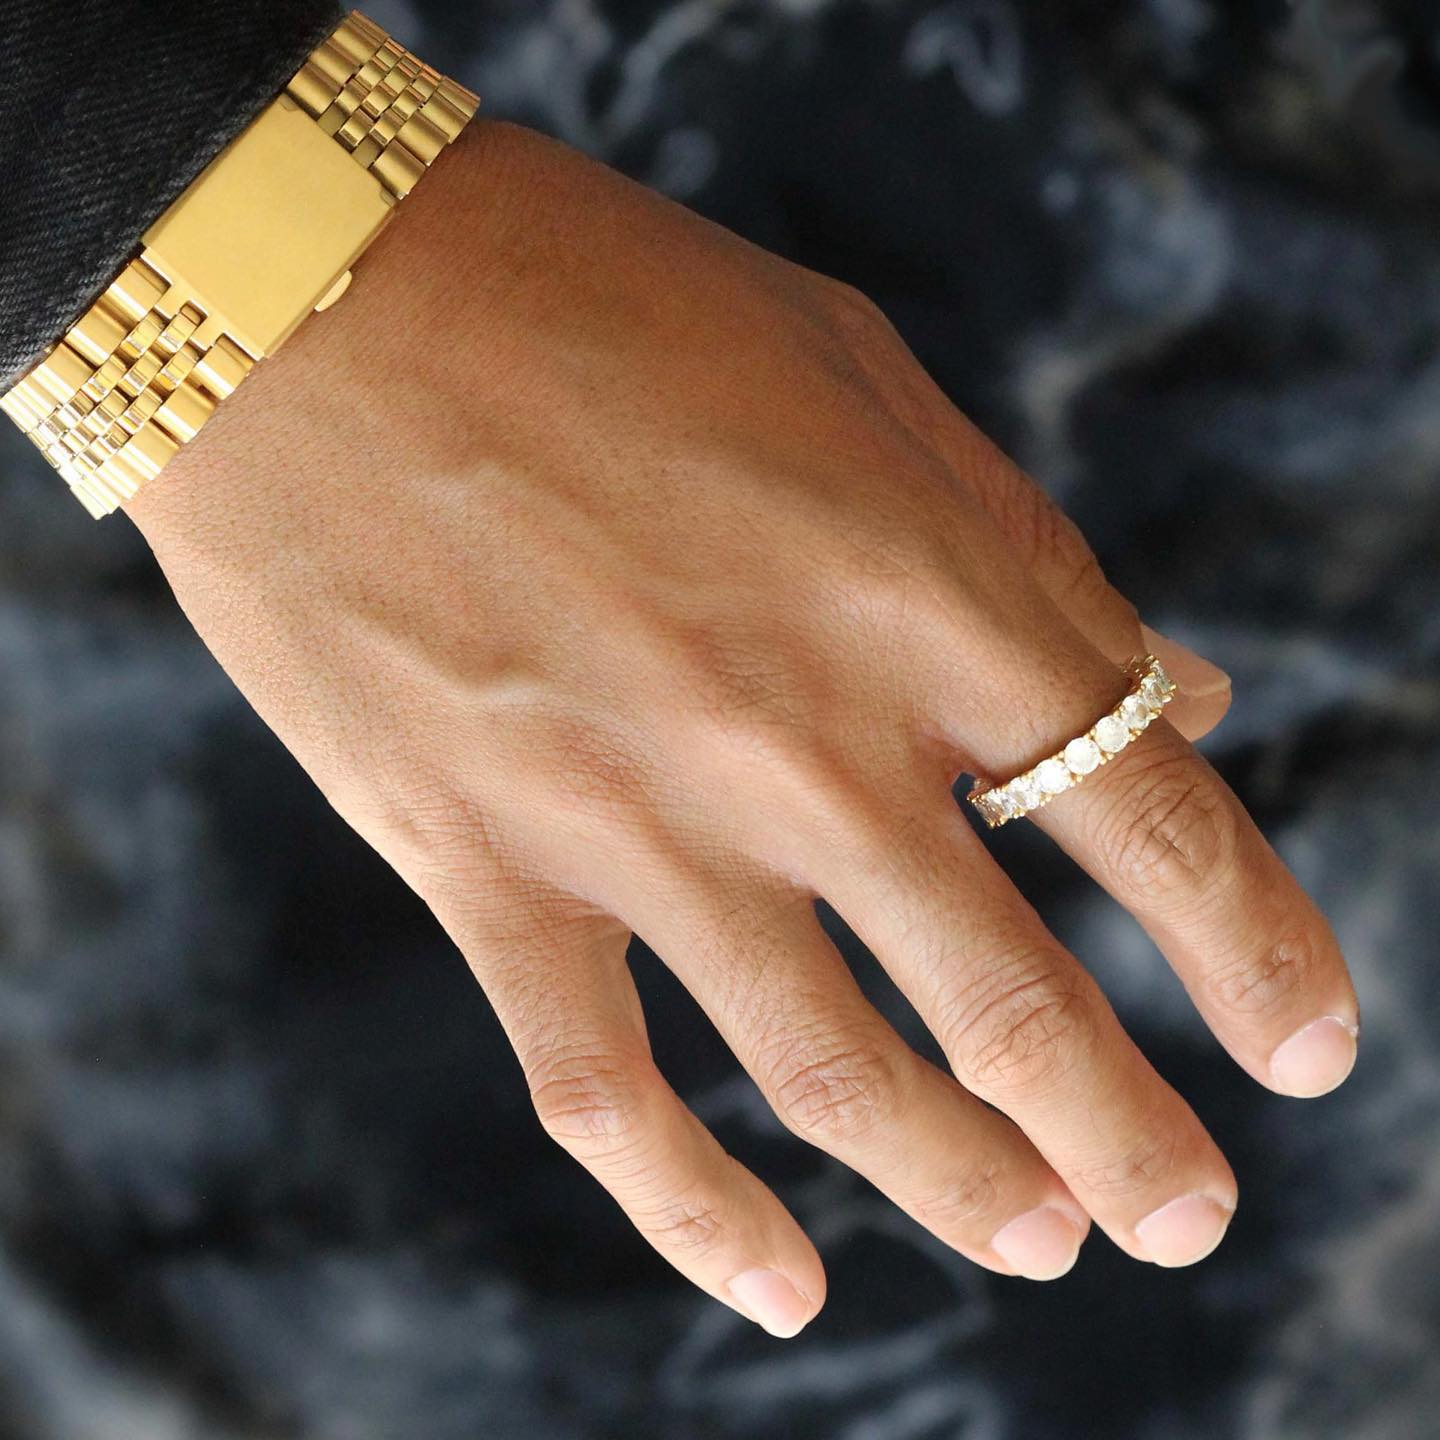 Pairing our Band Bracelet with...